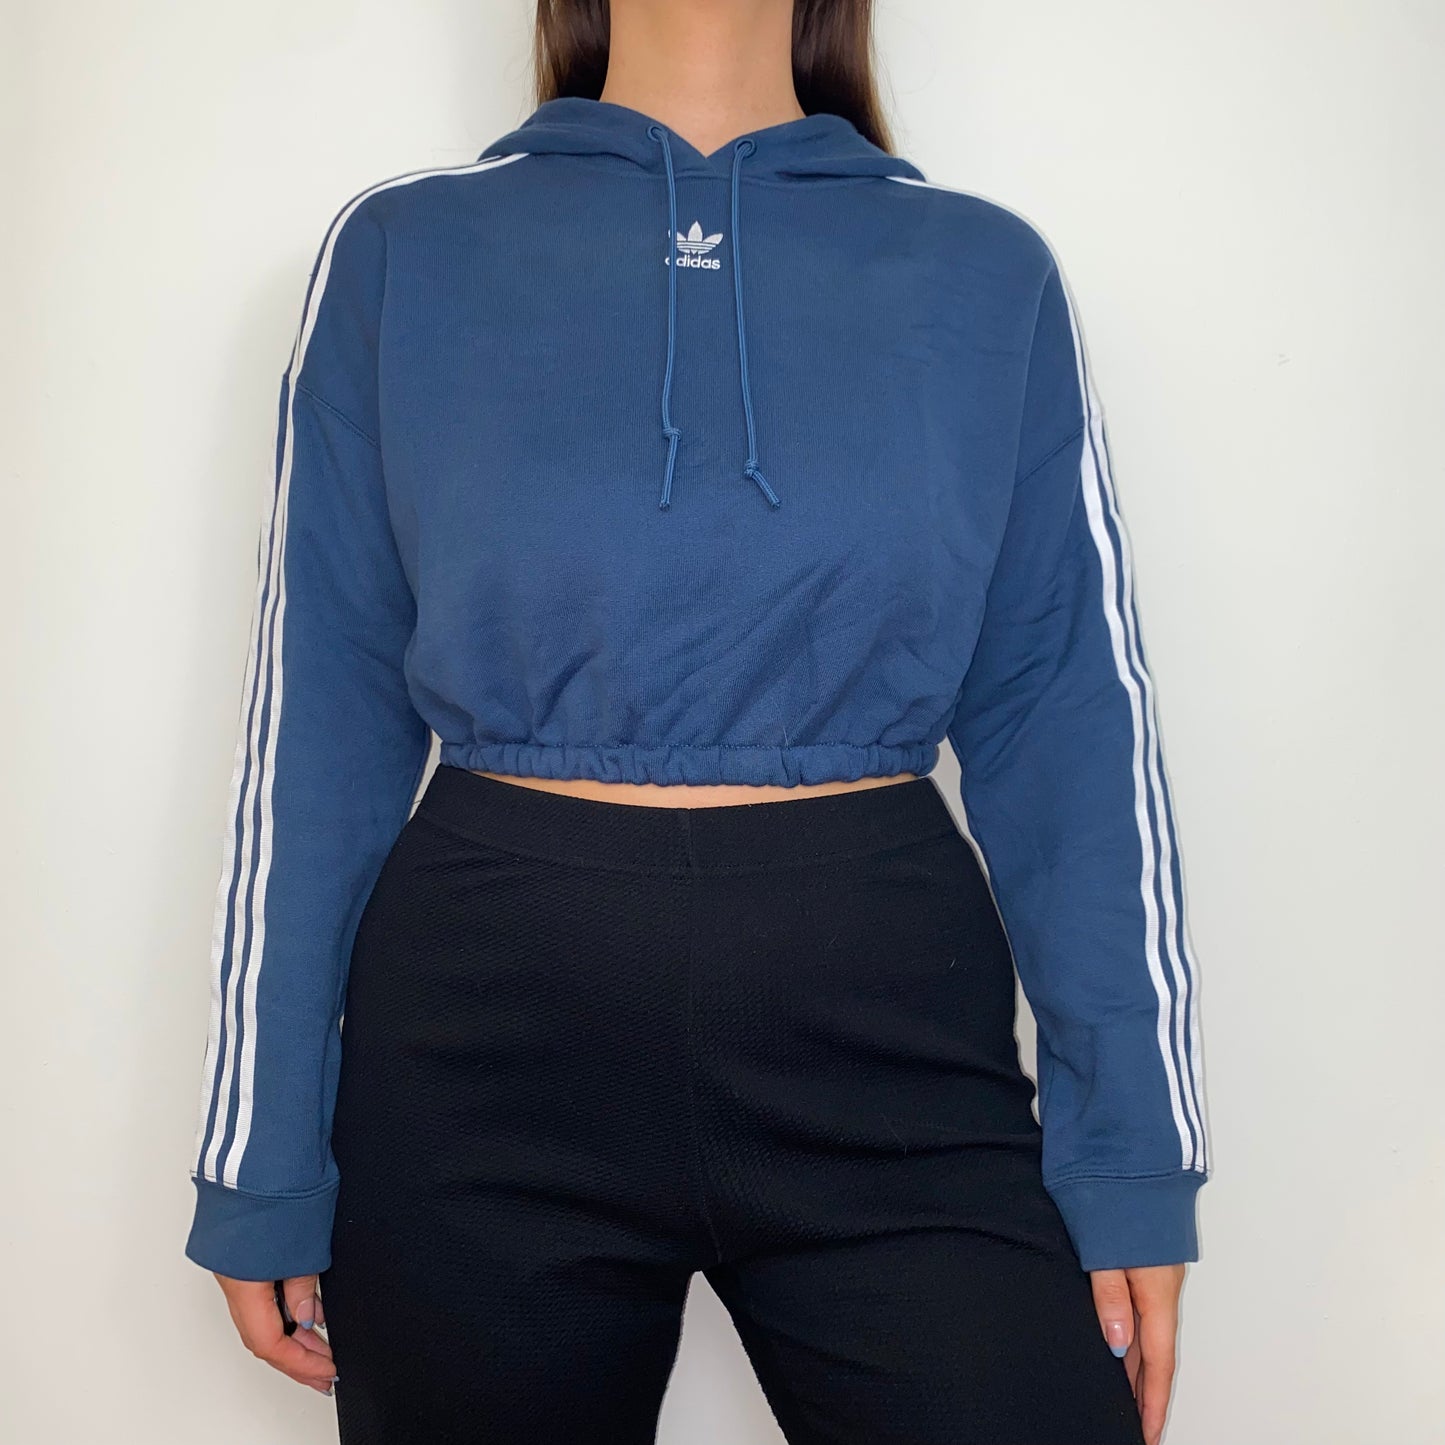 navy cropped hoodie with whtie adidas logo shown on a model wearing black trousers